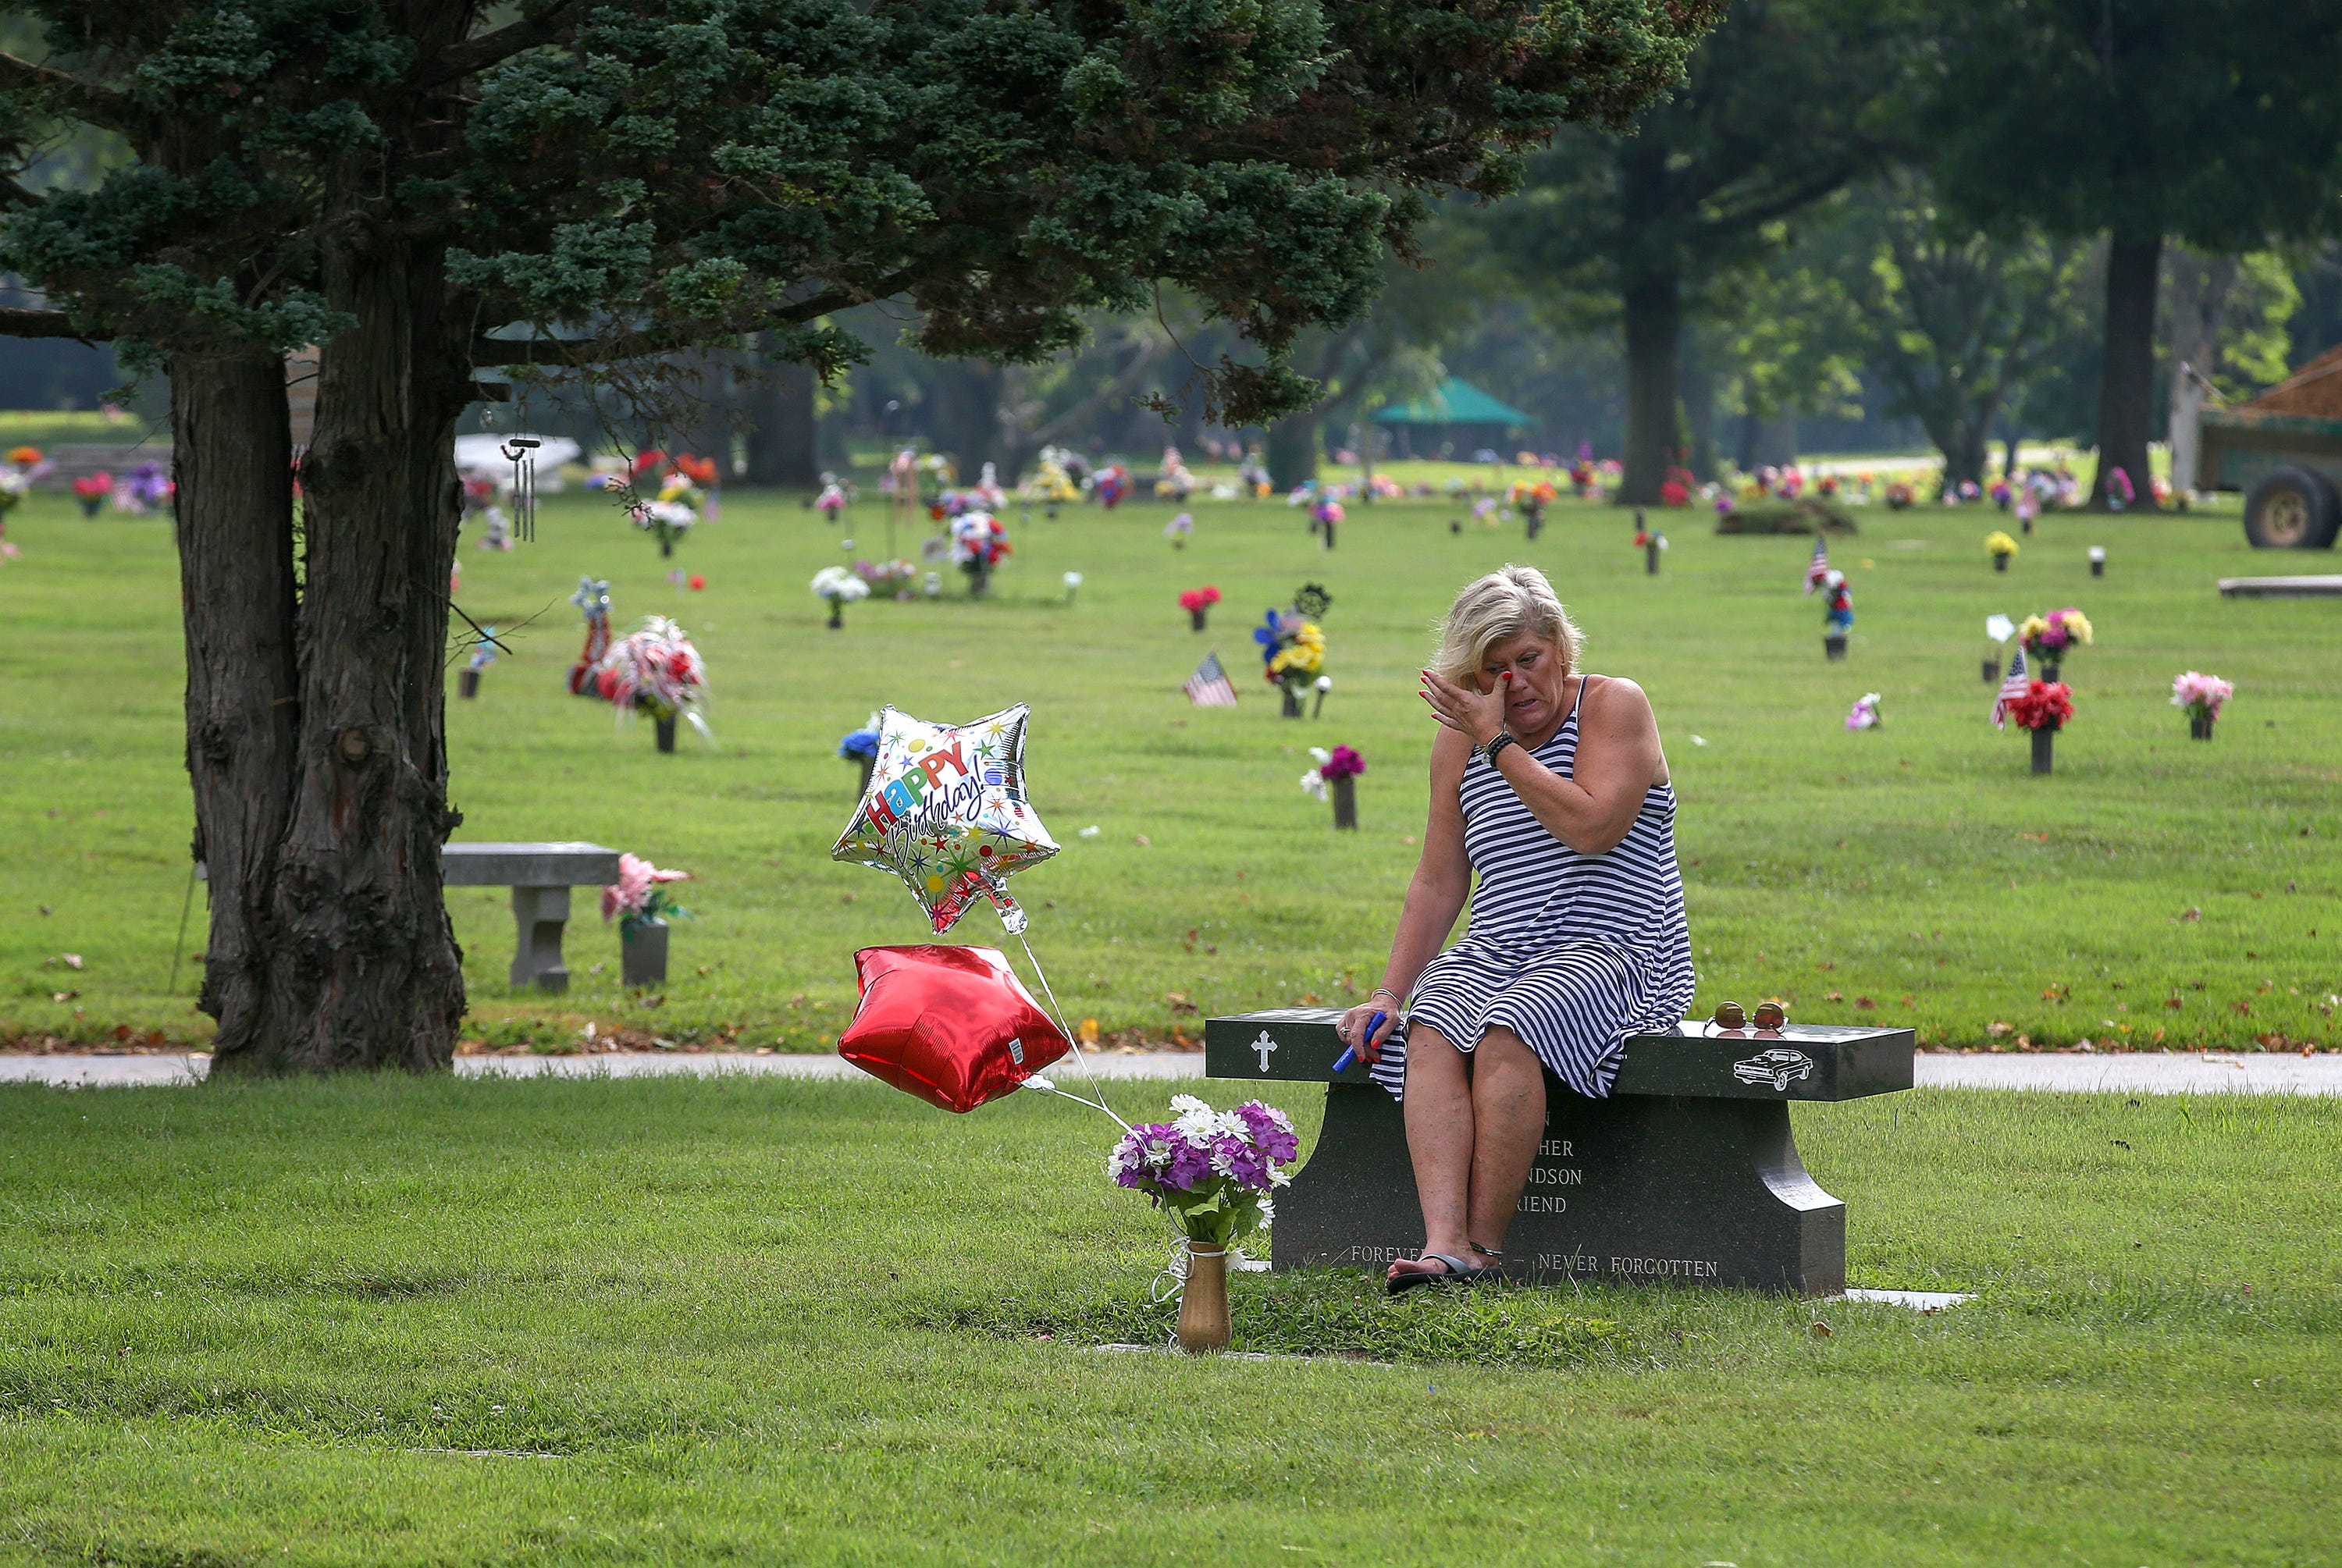 Michele Crockett, mother of Max Gilpin, visits at the grave of her son. It would have been Max Gilpin's 26th birthday, and she brought balloons as she does every year. He died after becoming overheated at football practice at Pleasure Ridge Park High School in 2008.
July 19, 2019